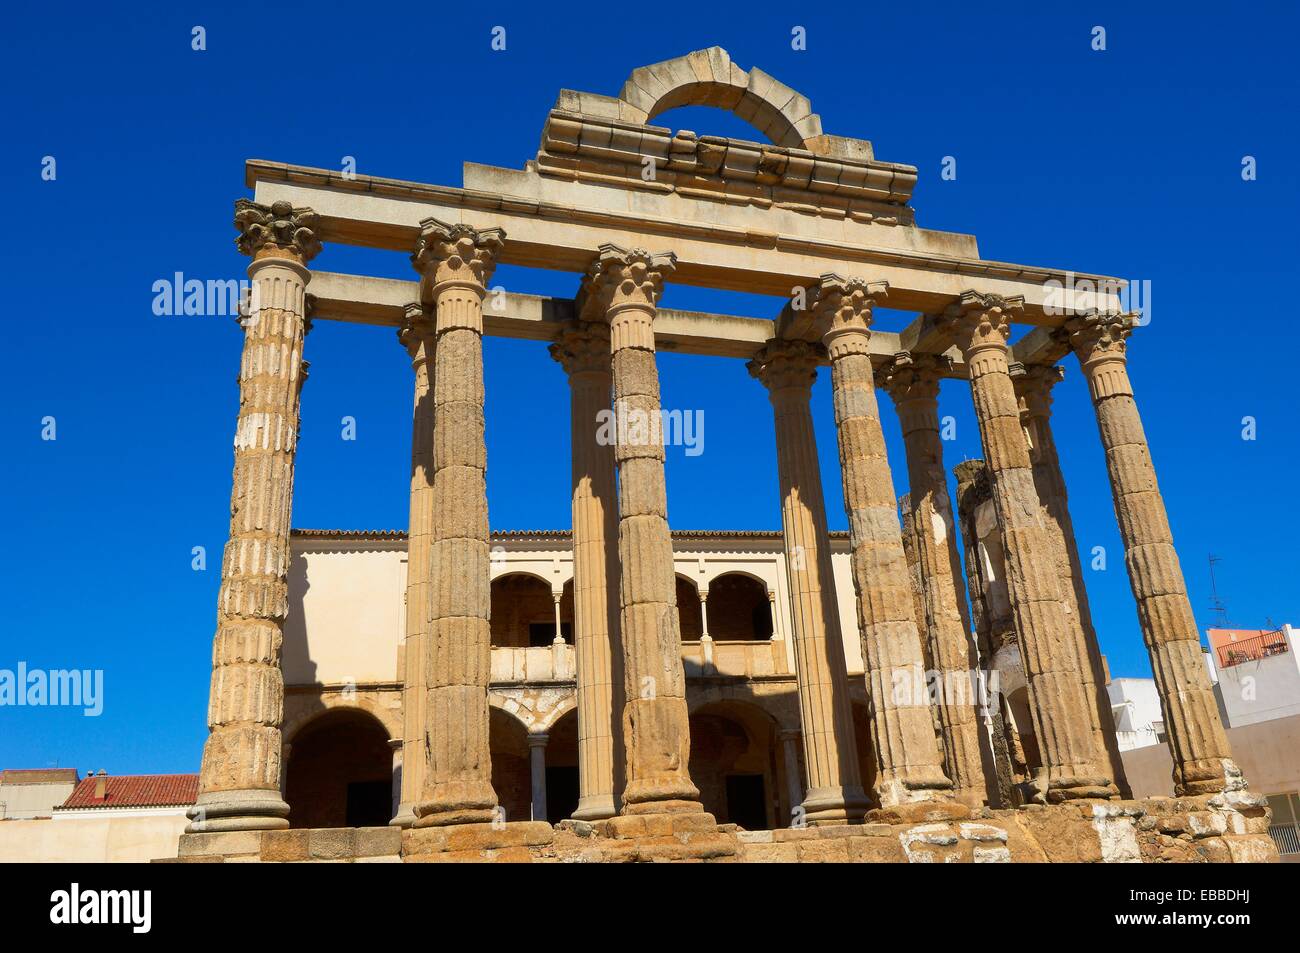 Ancient history antiquity archaeology Architectural detail architecture Badajoz city color image column day detail Diana Stock Photo